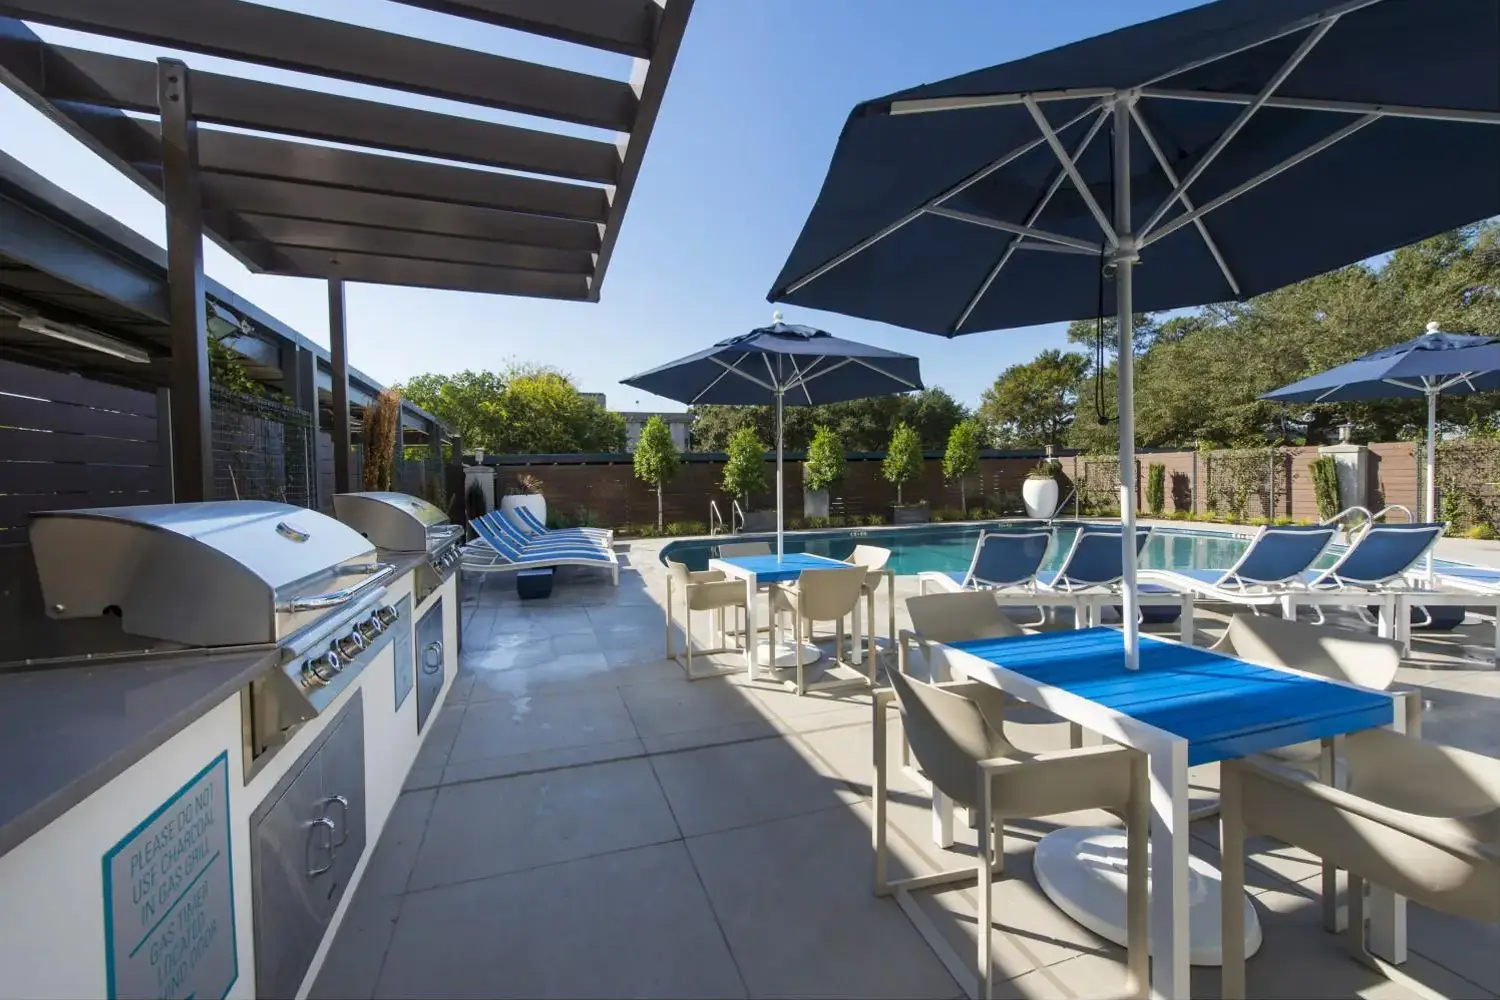 Community area with a pool, grill, blue and white polled umbrellas, lounge chairs, and a wooden pergola.